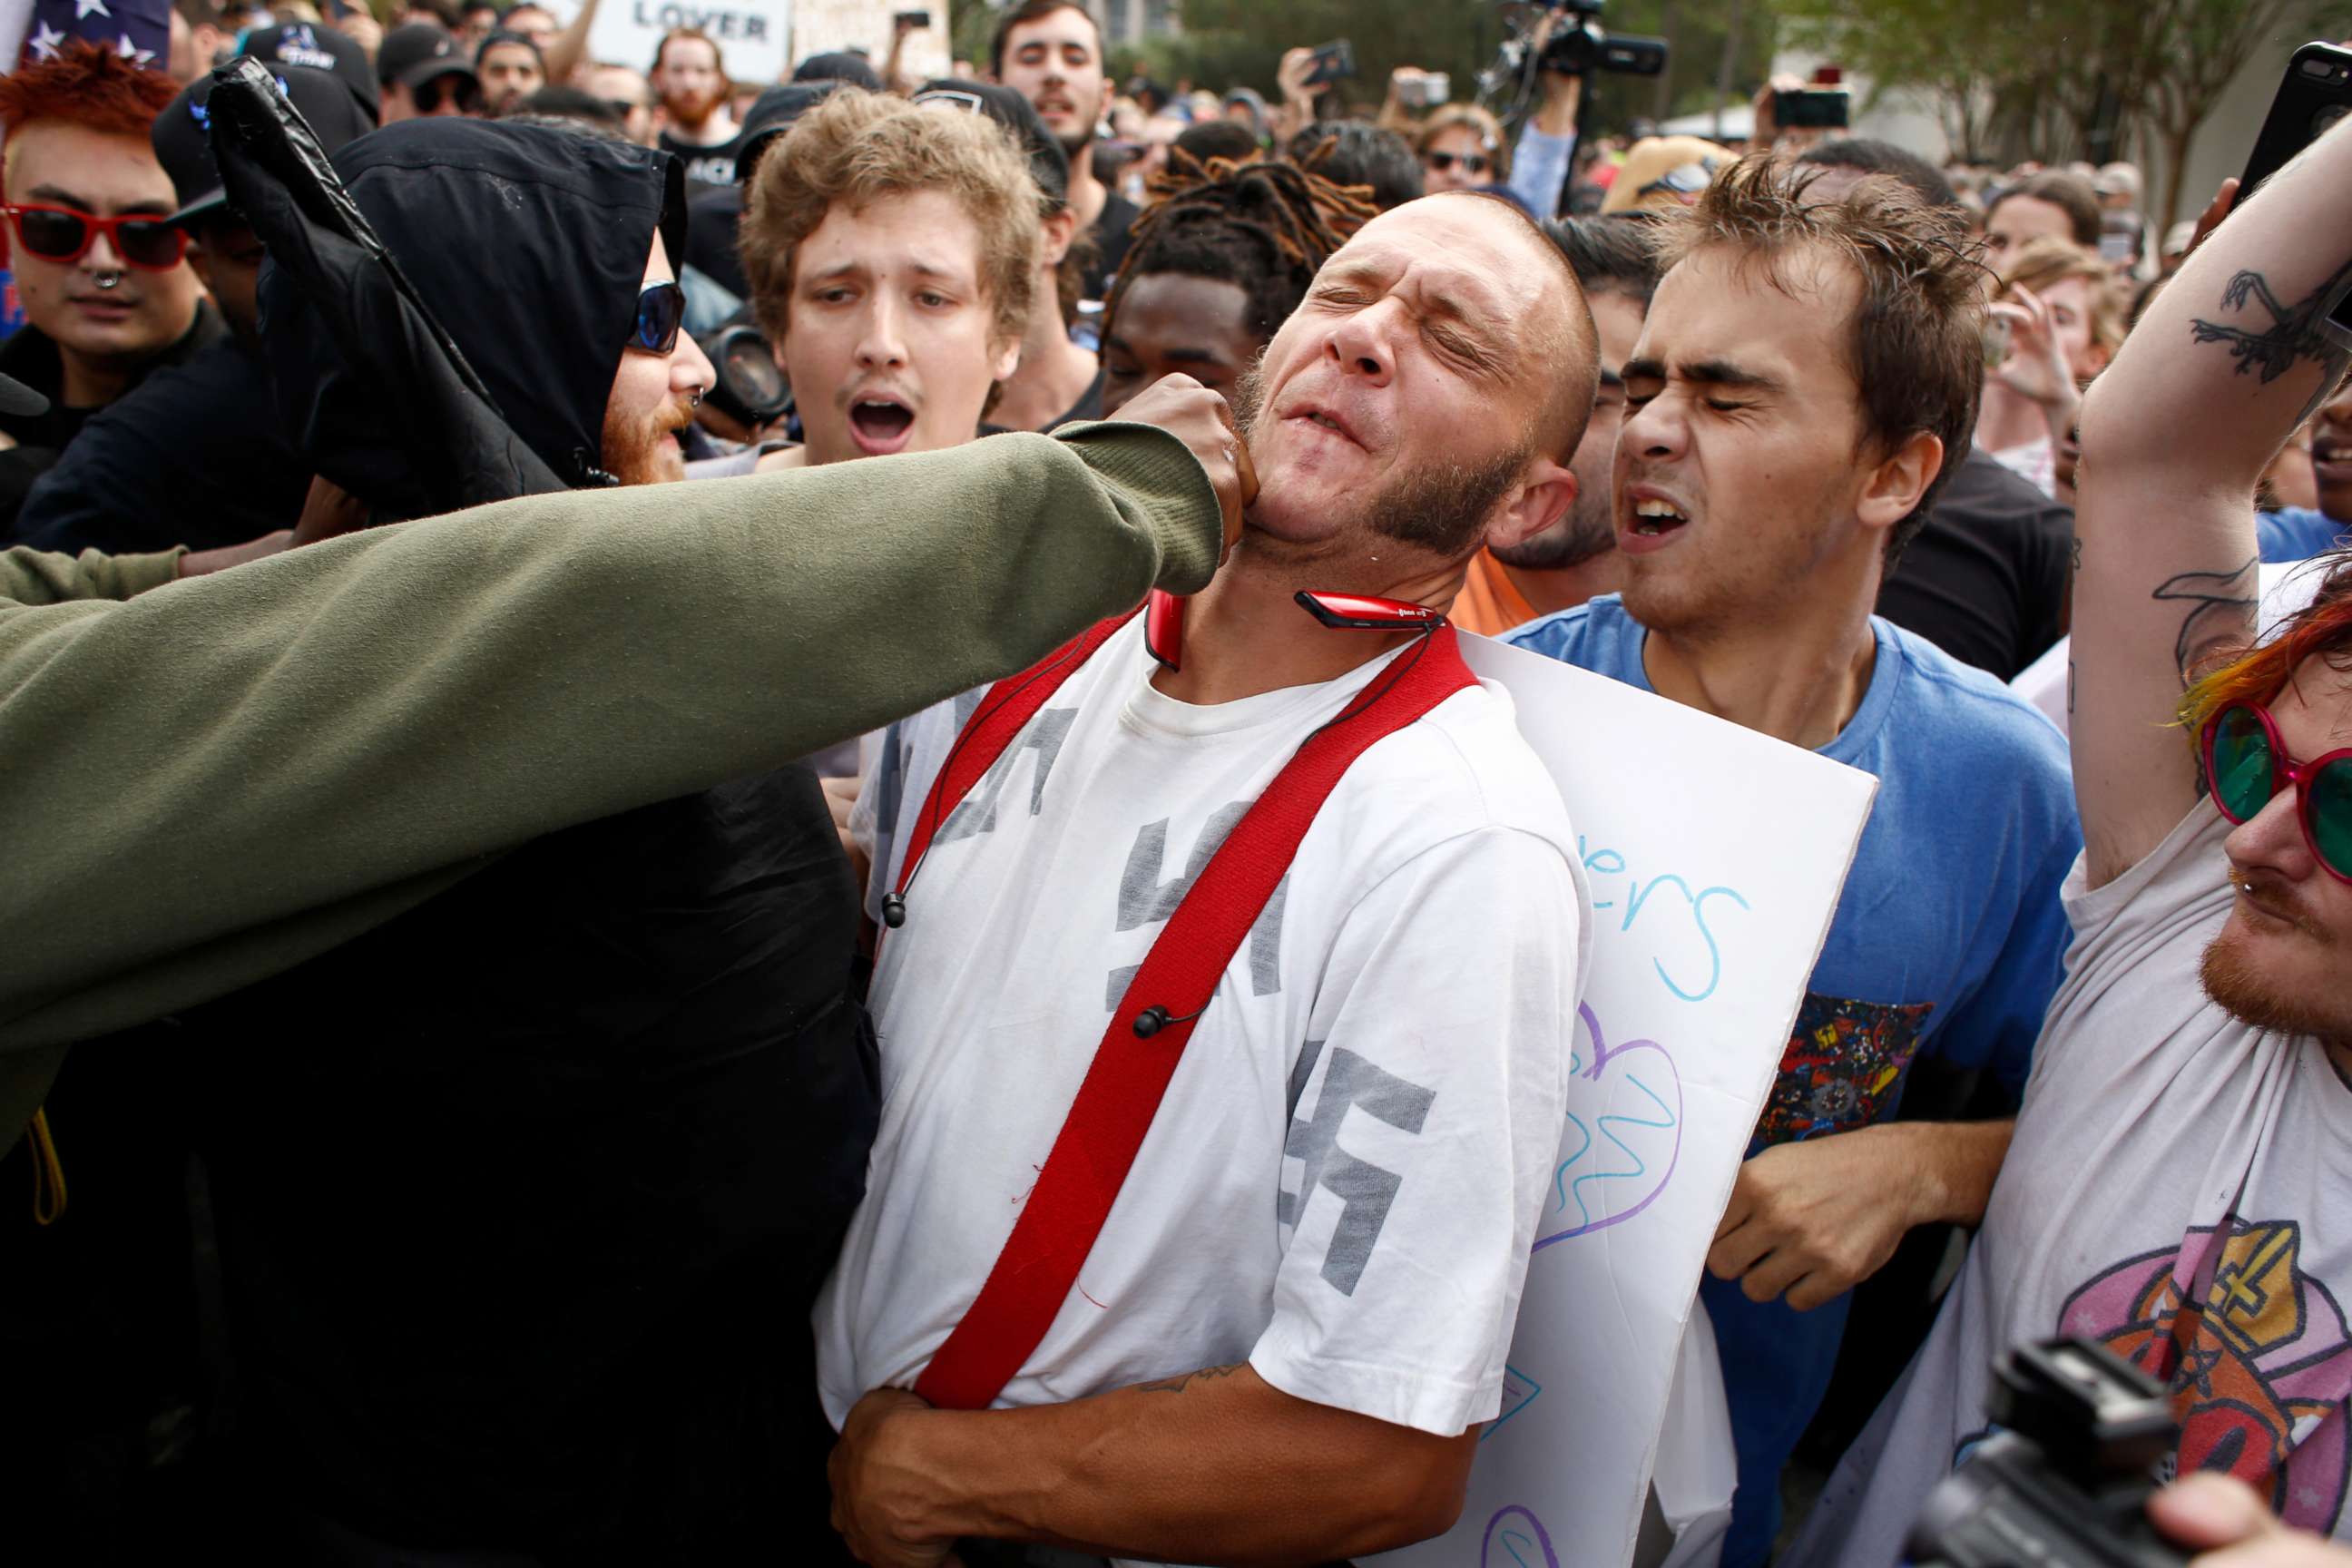 PHOTO: A man wearing a shirt with swastikas on it is punched by an unidentified member of the crowd near the site of a planned speech by white nationalist Richard Spencer at the University of Florida campus, Oct. 19, 2017, in Gainesville, Florida.